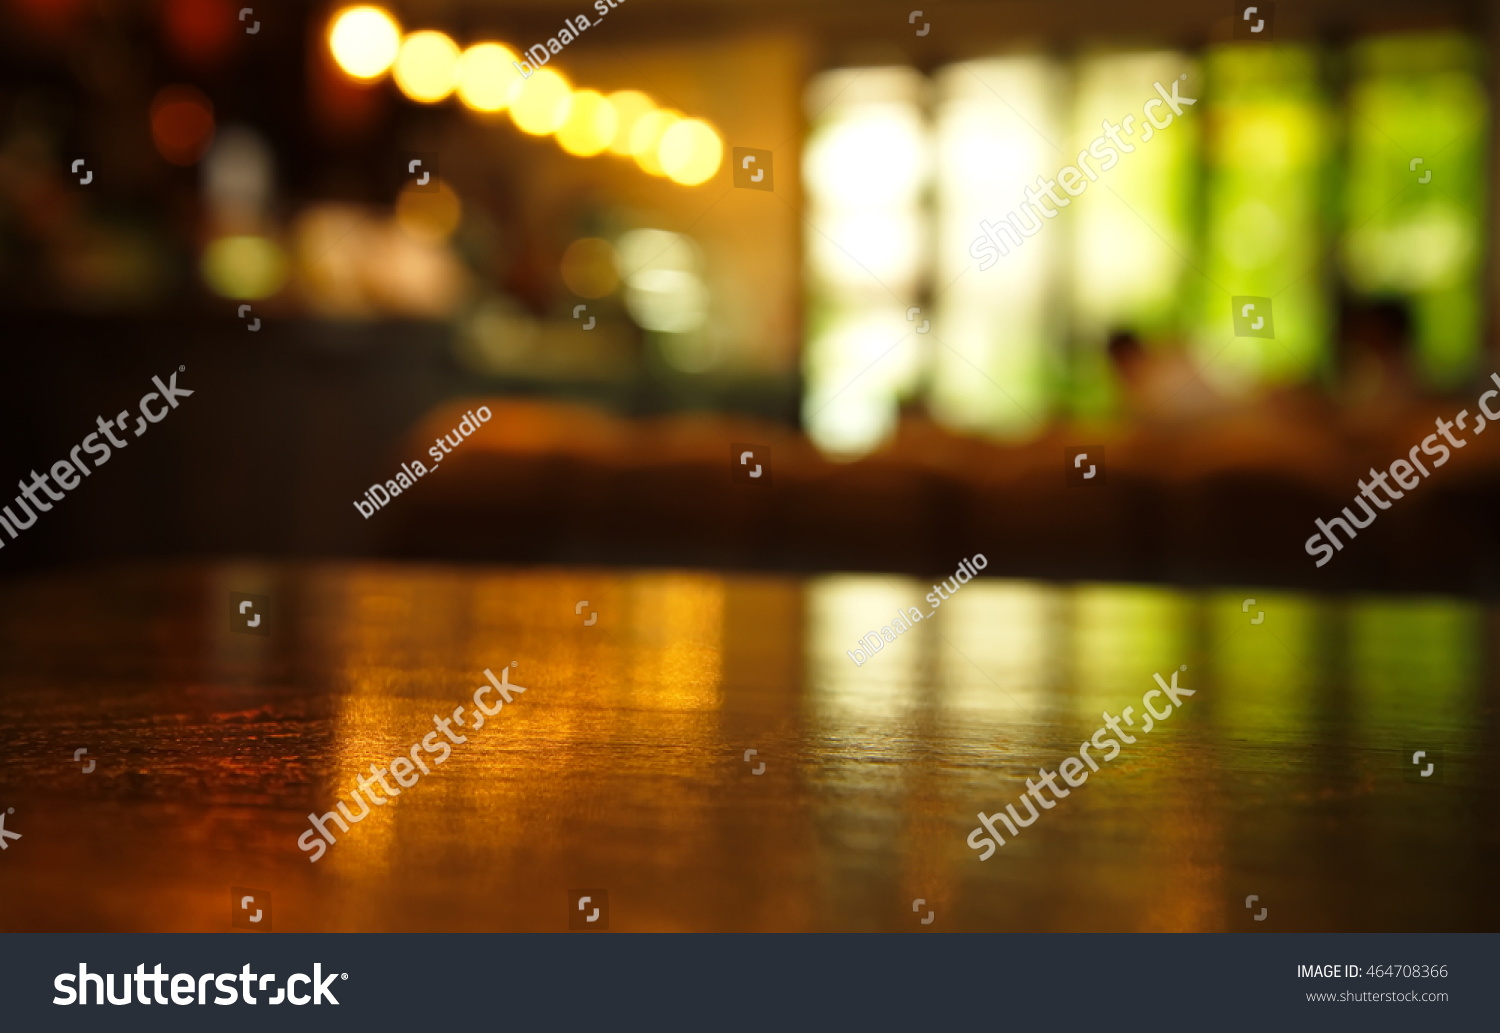 blur light reflection on table in bar at night background #464708366